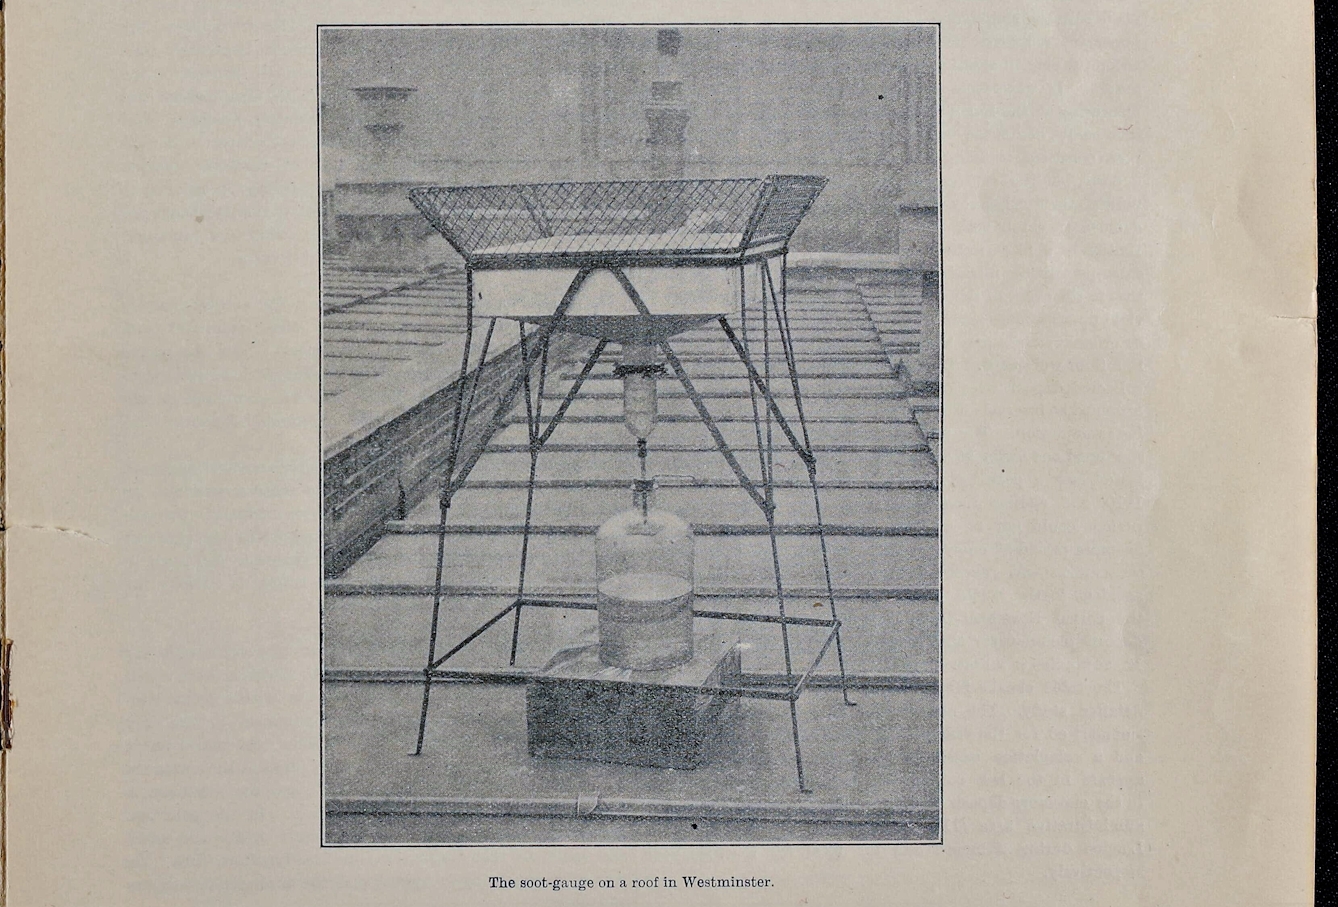 Picture of a black and white image printed in a book captioned "The soot-gauge on a roof in Westminster." The device is a square metal stand with a funnel-like component filtering into a glass-looking tube, which then connects to a narrow metallic tube that passes through a cork into a large jug bottle below. 